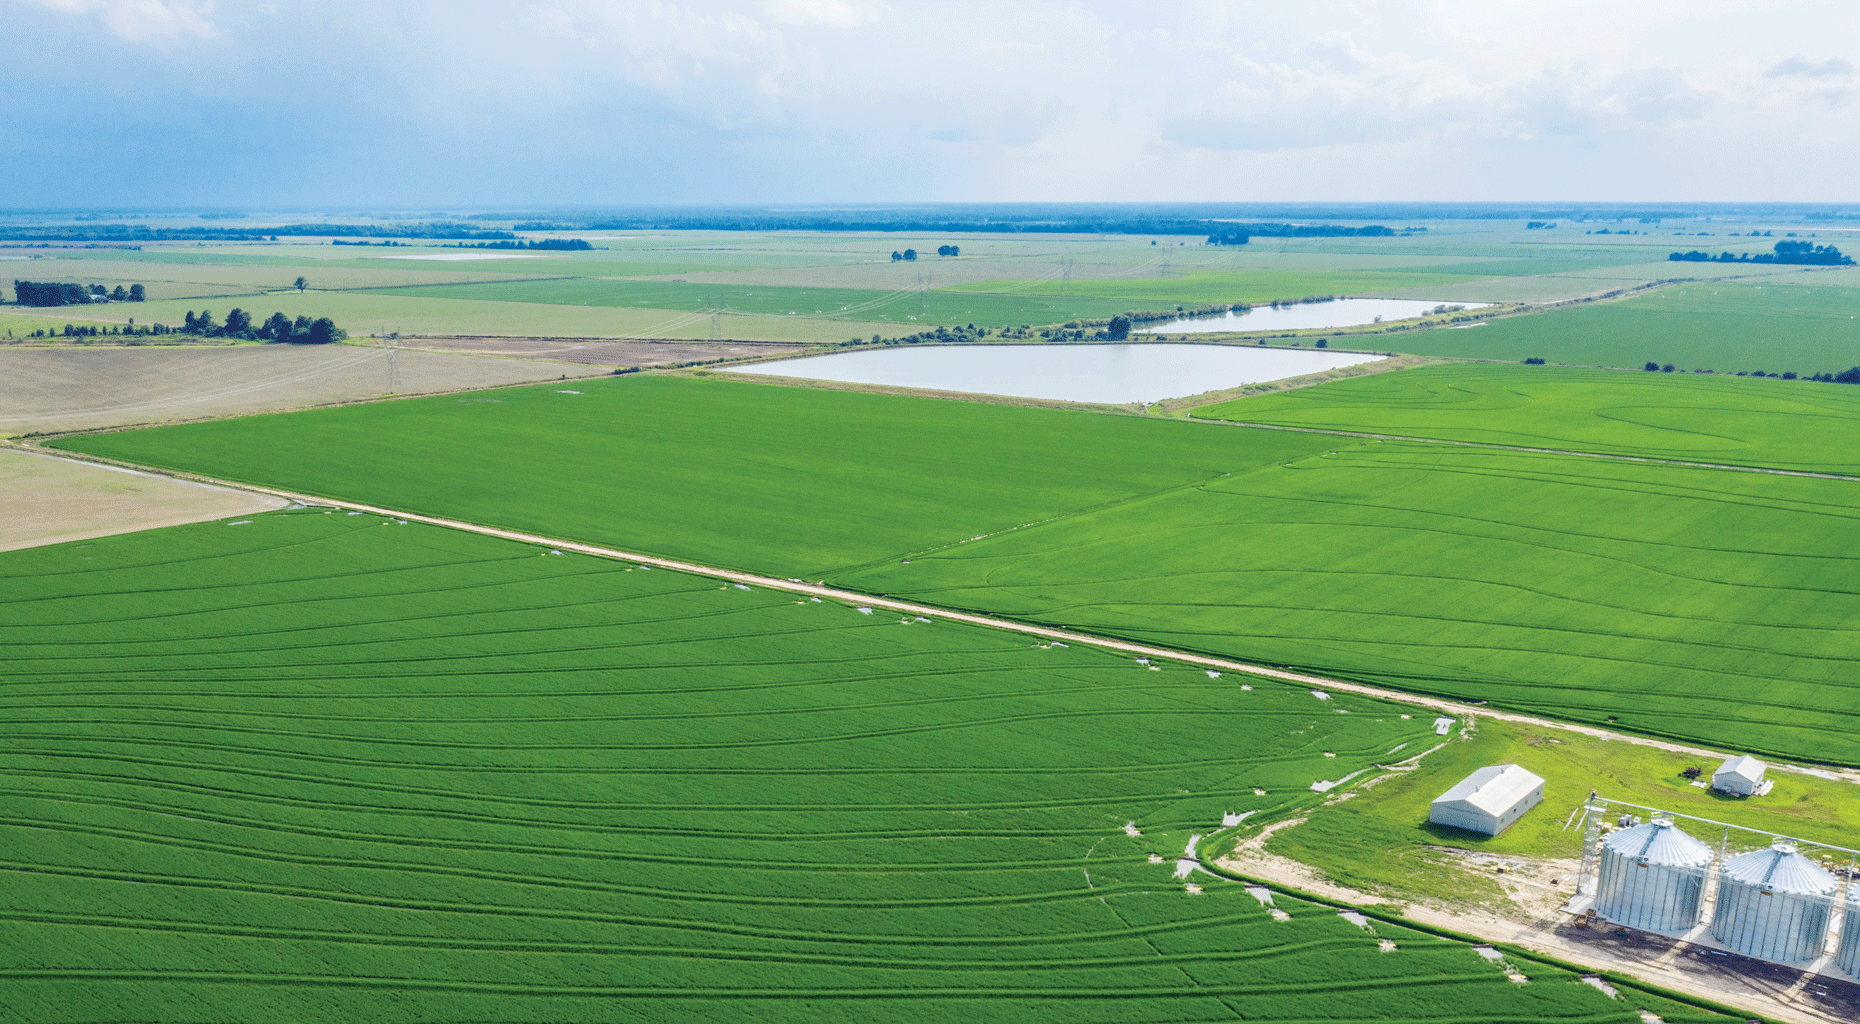 Photograph showing rice fields in eastern Arkansas. Onfarm reservoirs can be seen
                     in the background.